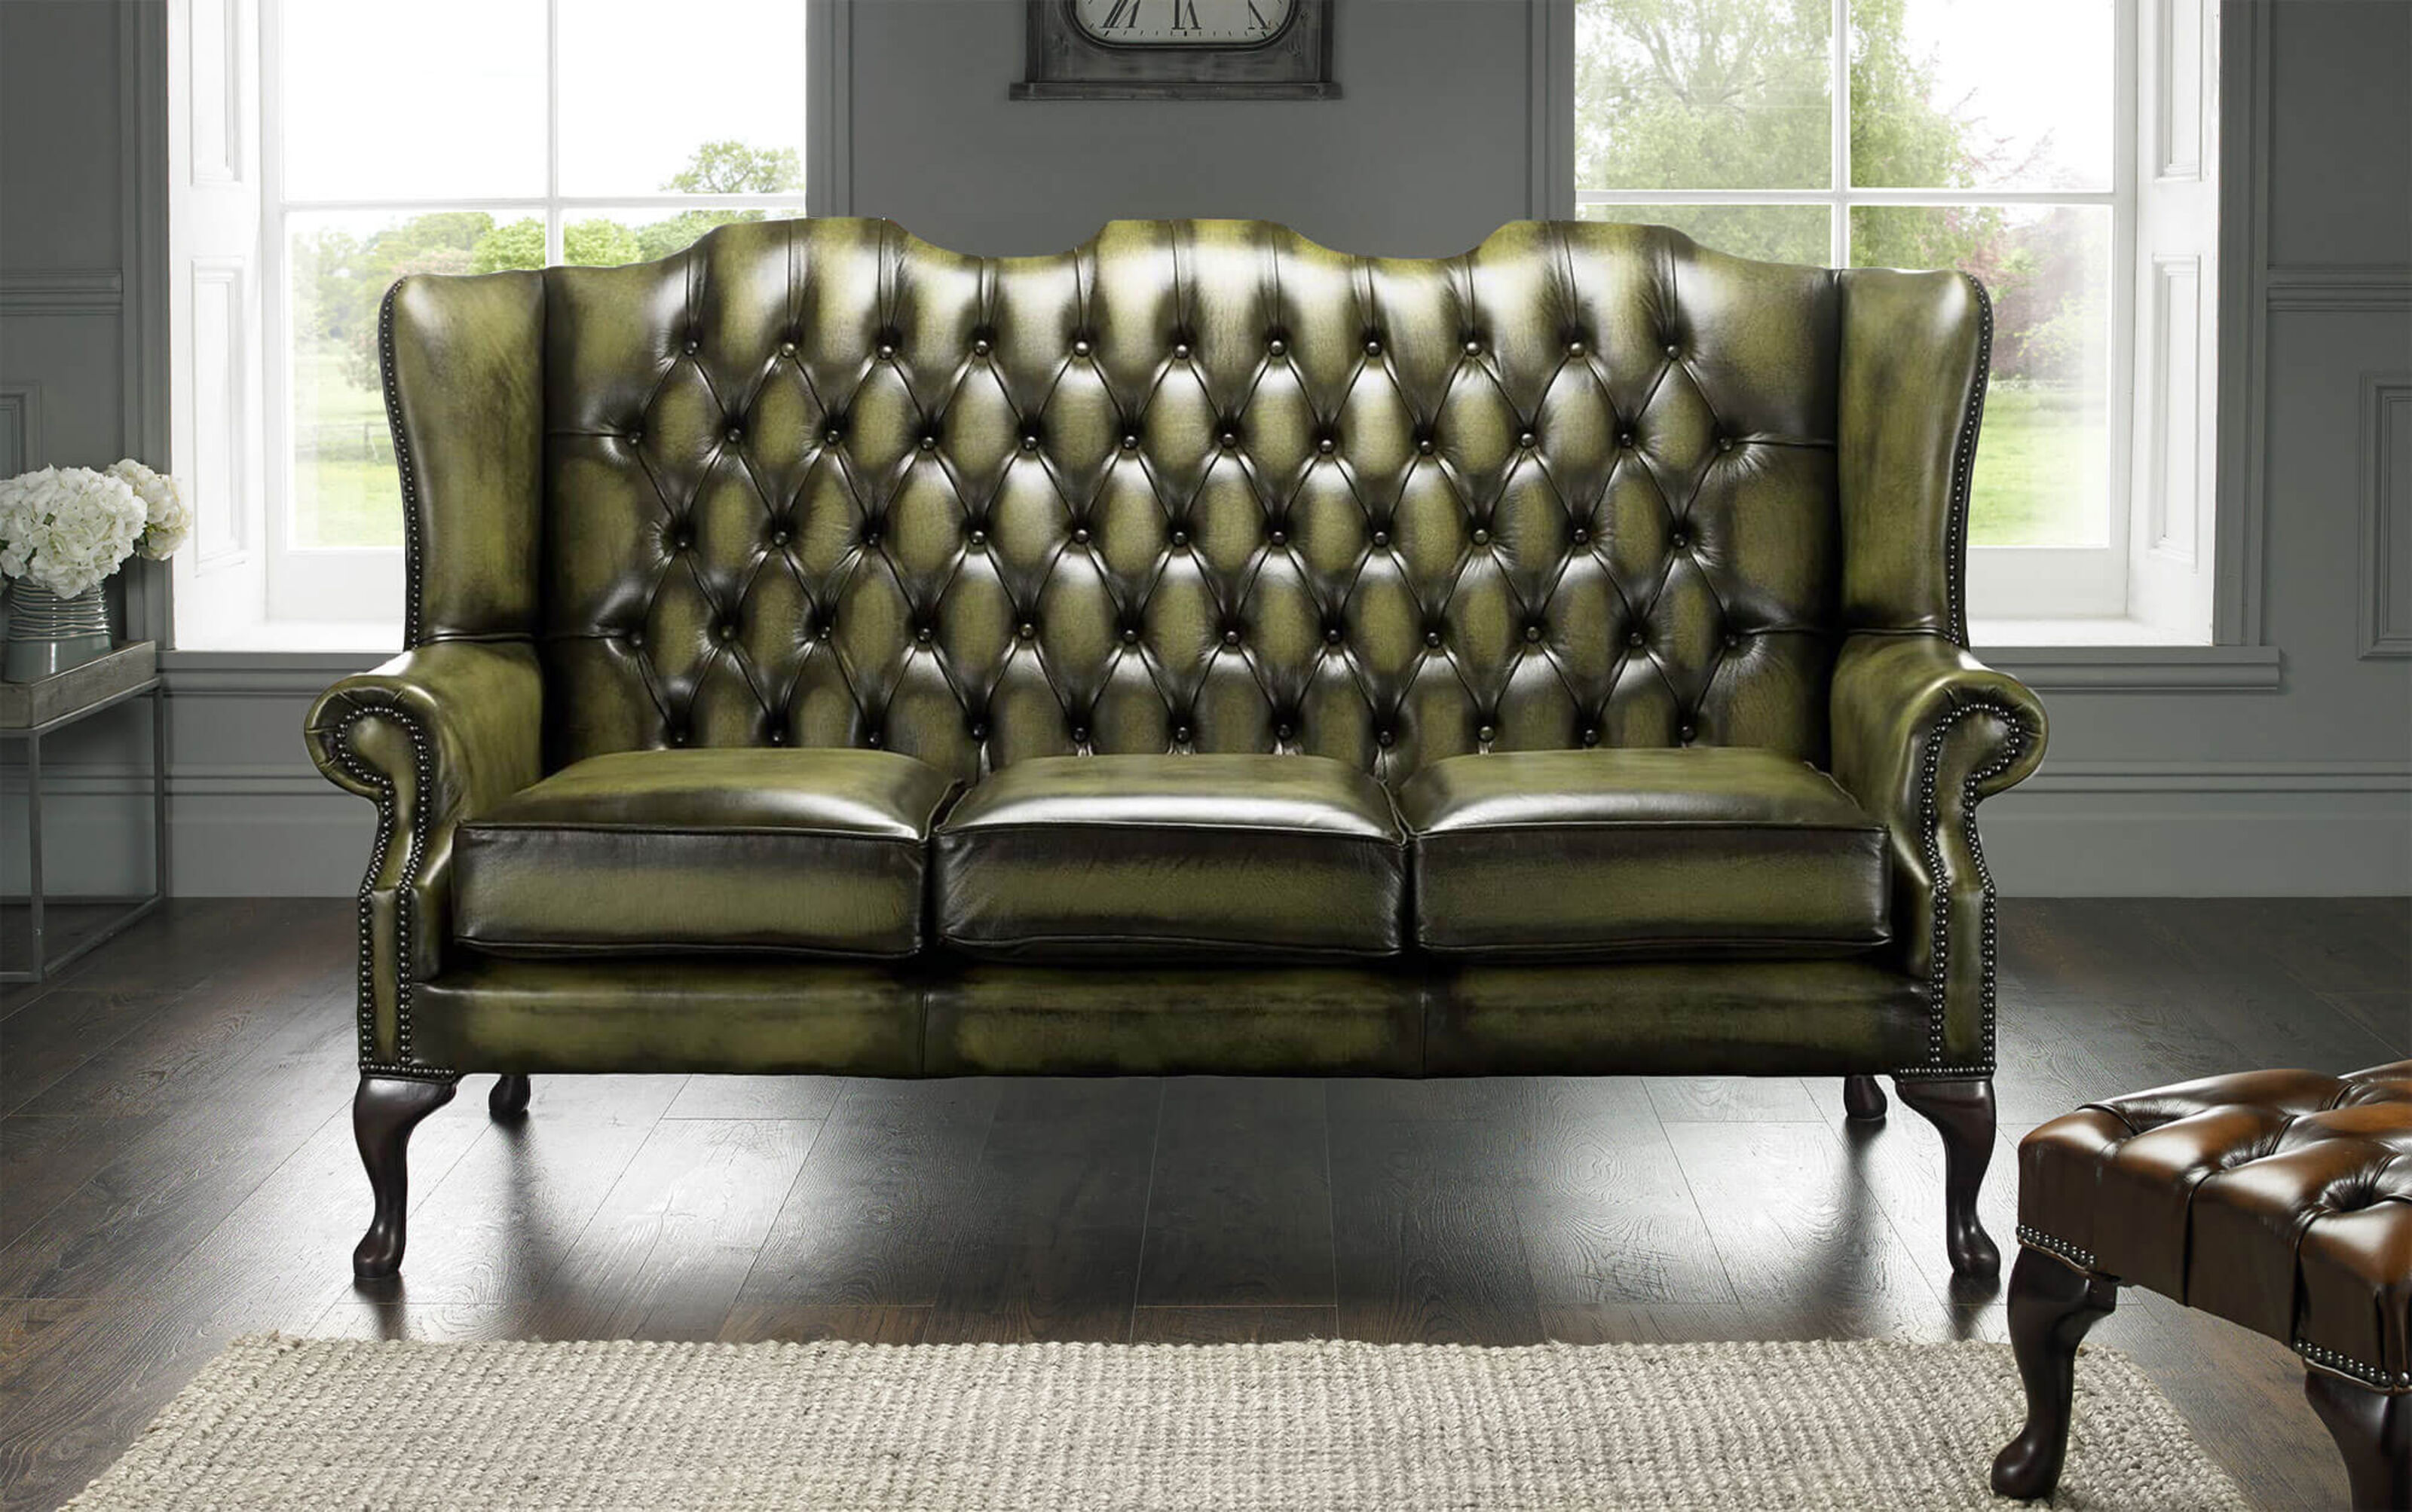 Discover the Charm of a Chesterfield Queen Anne Sofa  %Post Title